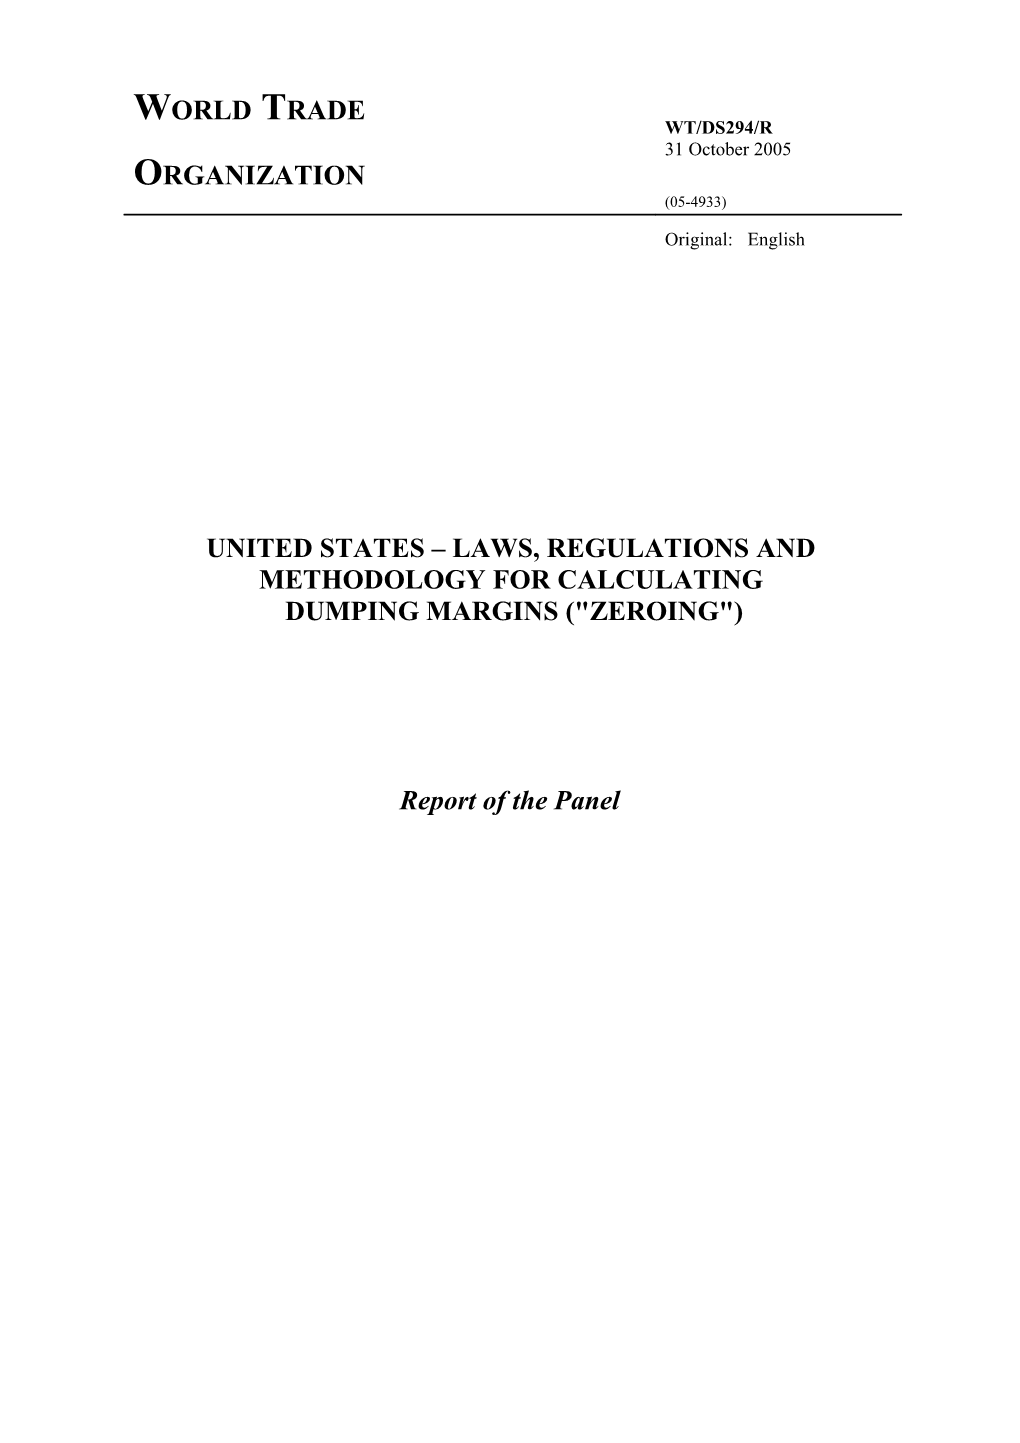 United States Laws, Regulations And